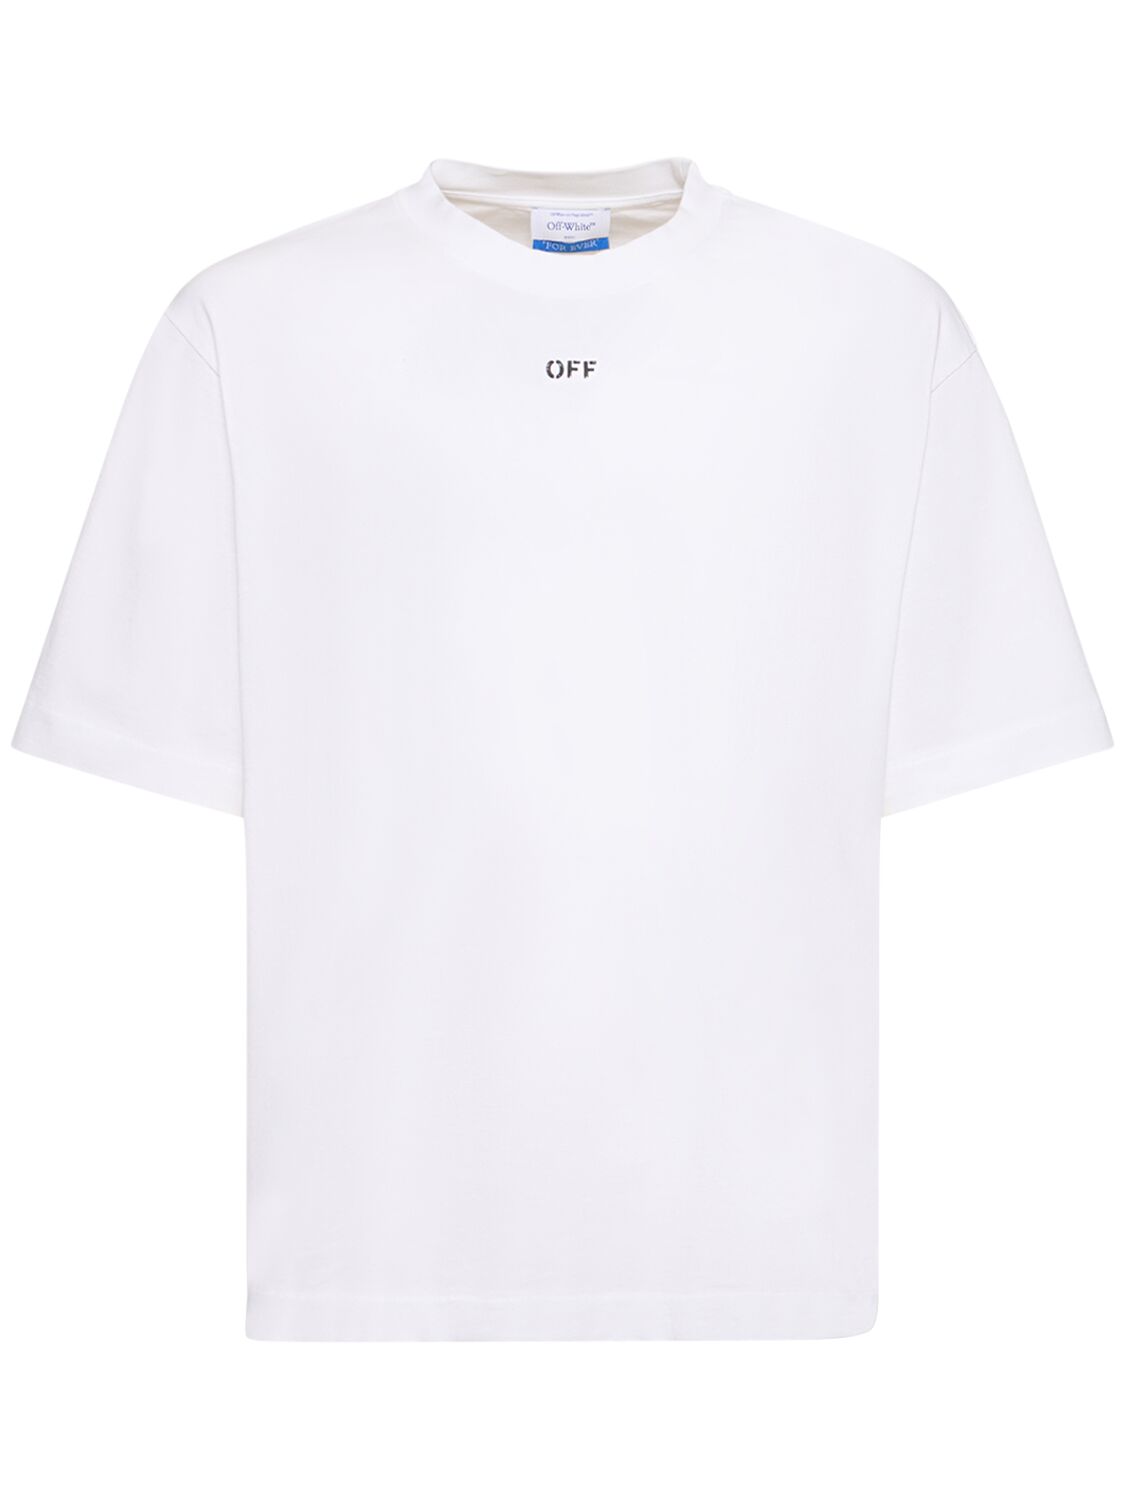 Image of Off Stamp Cotton T-shirt